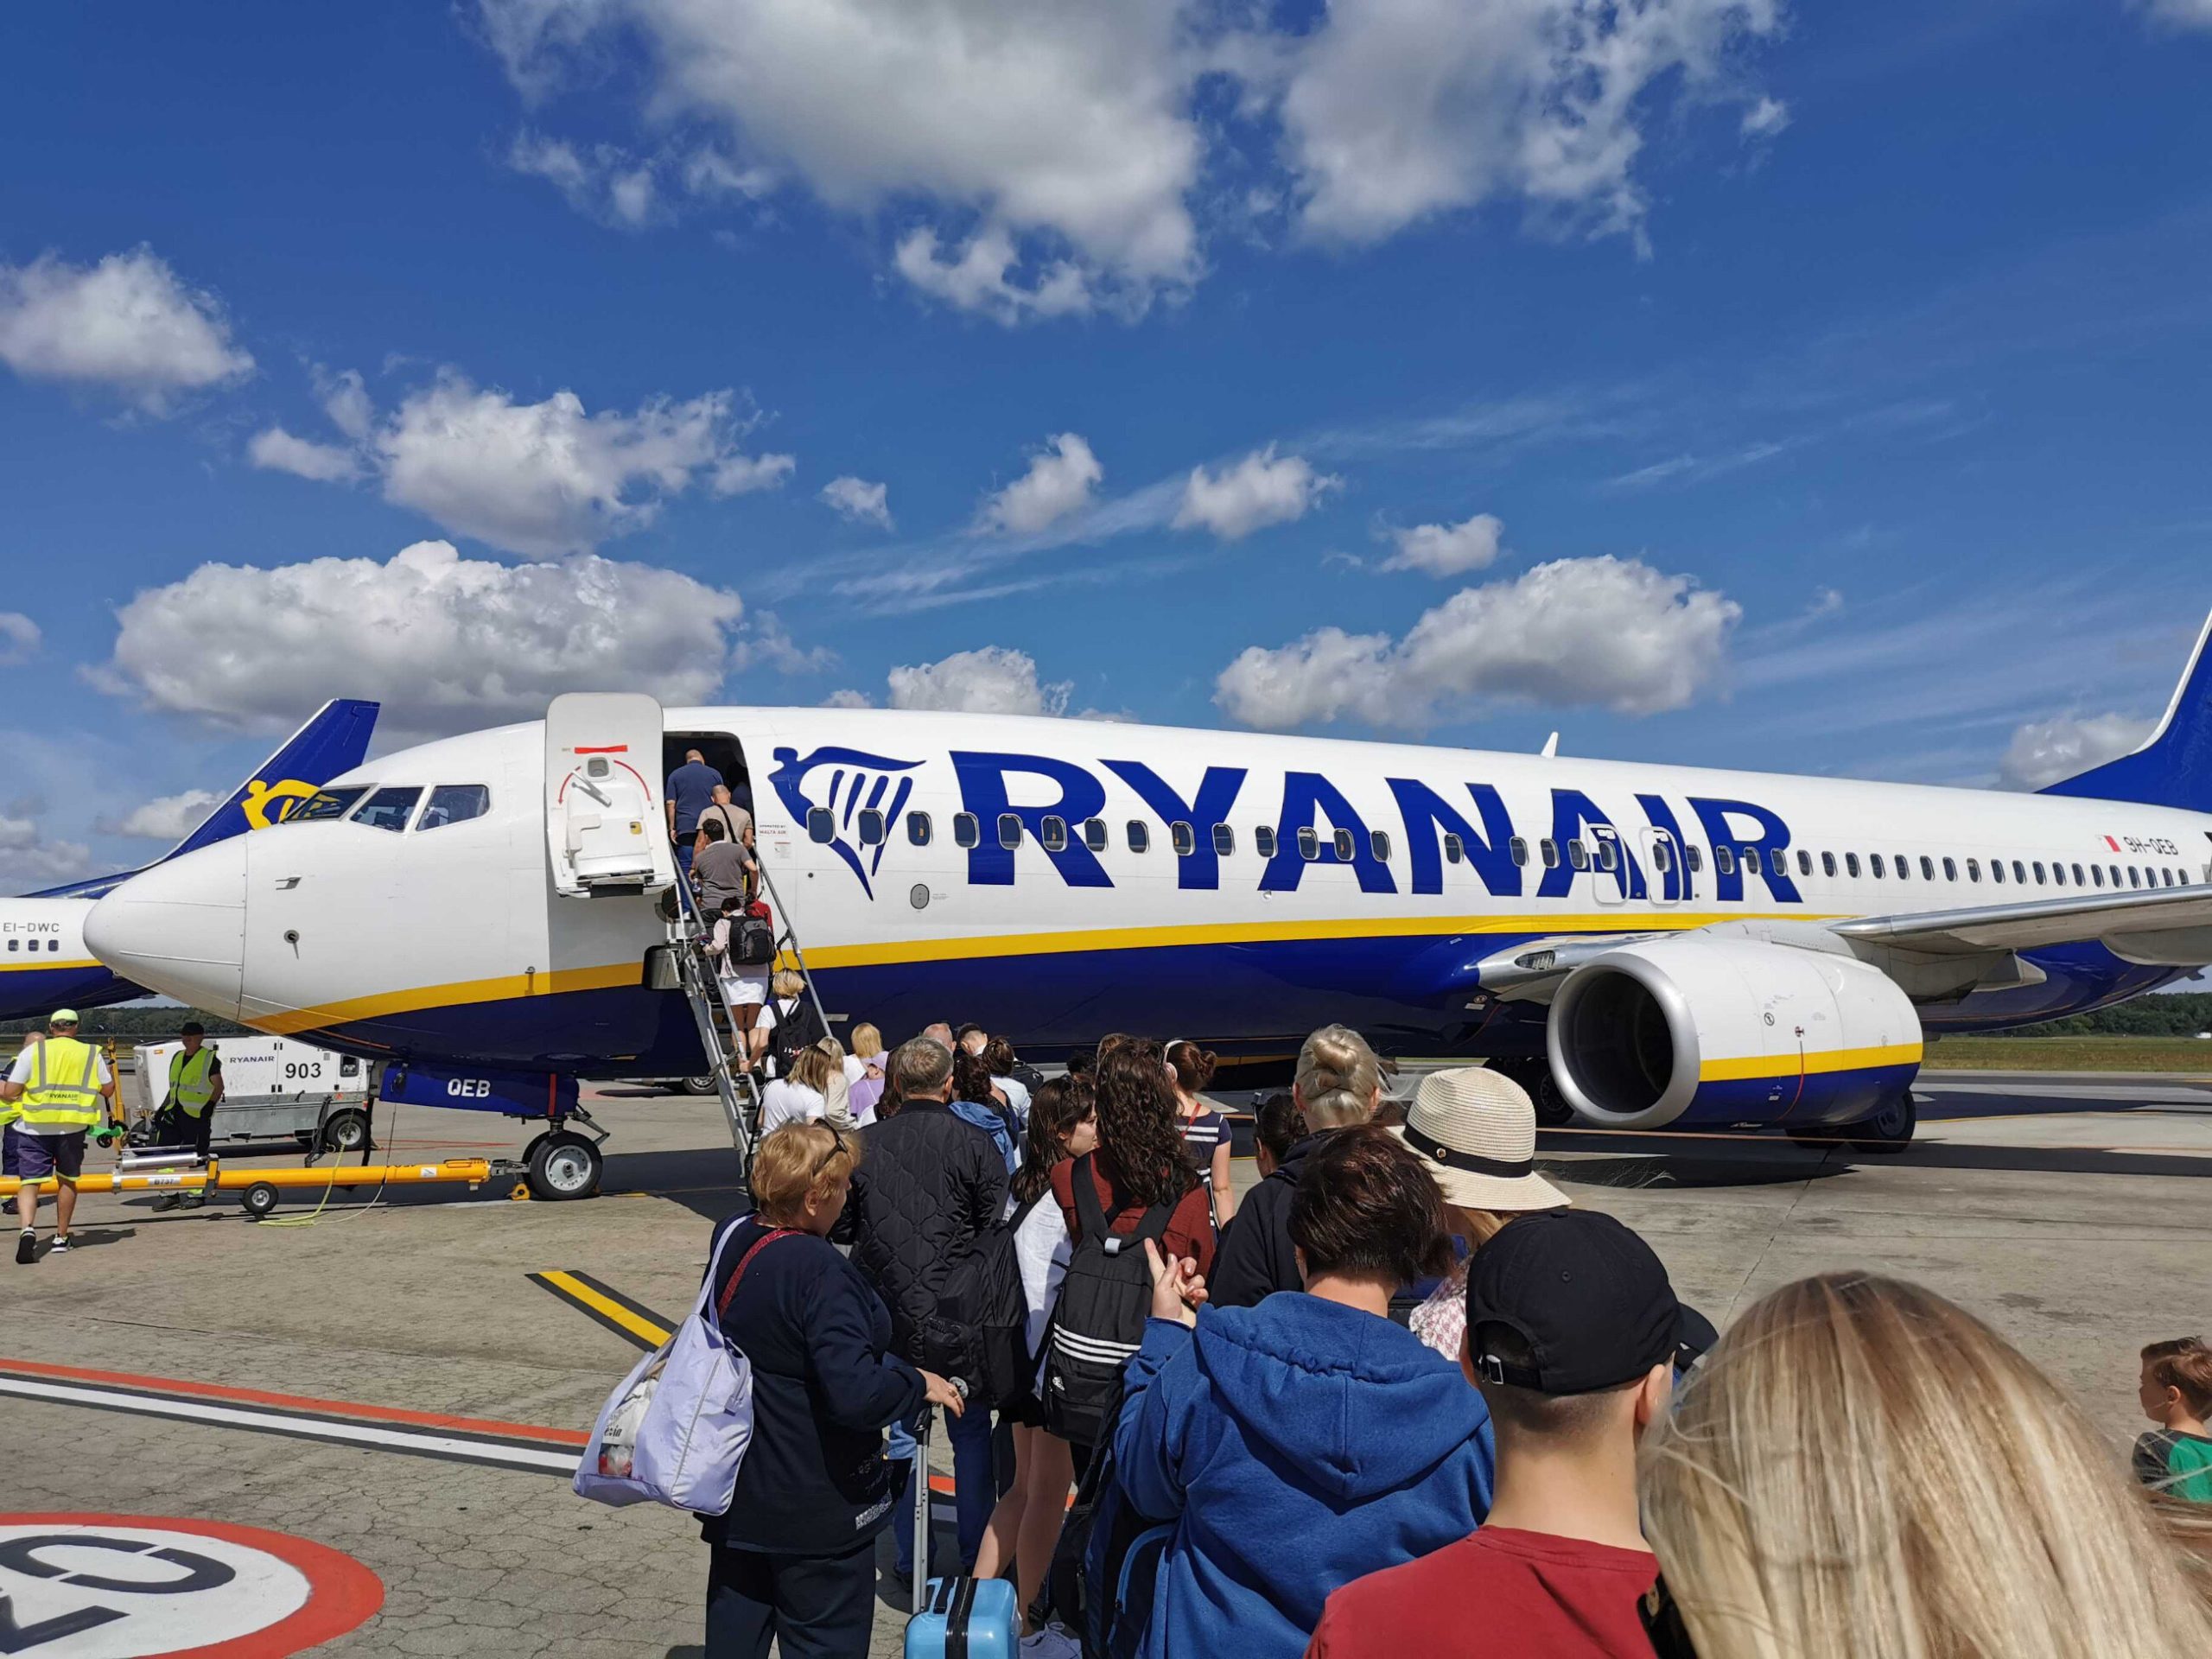 Cheap flights from Poland to Croatia.  Ryanair launches new routes